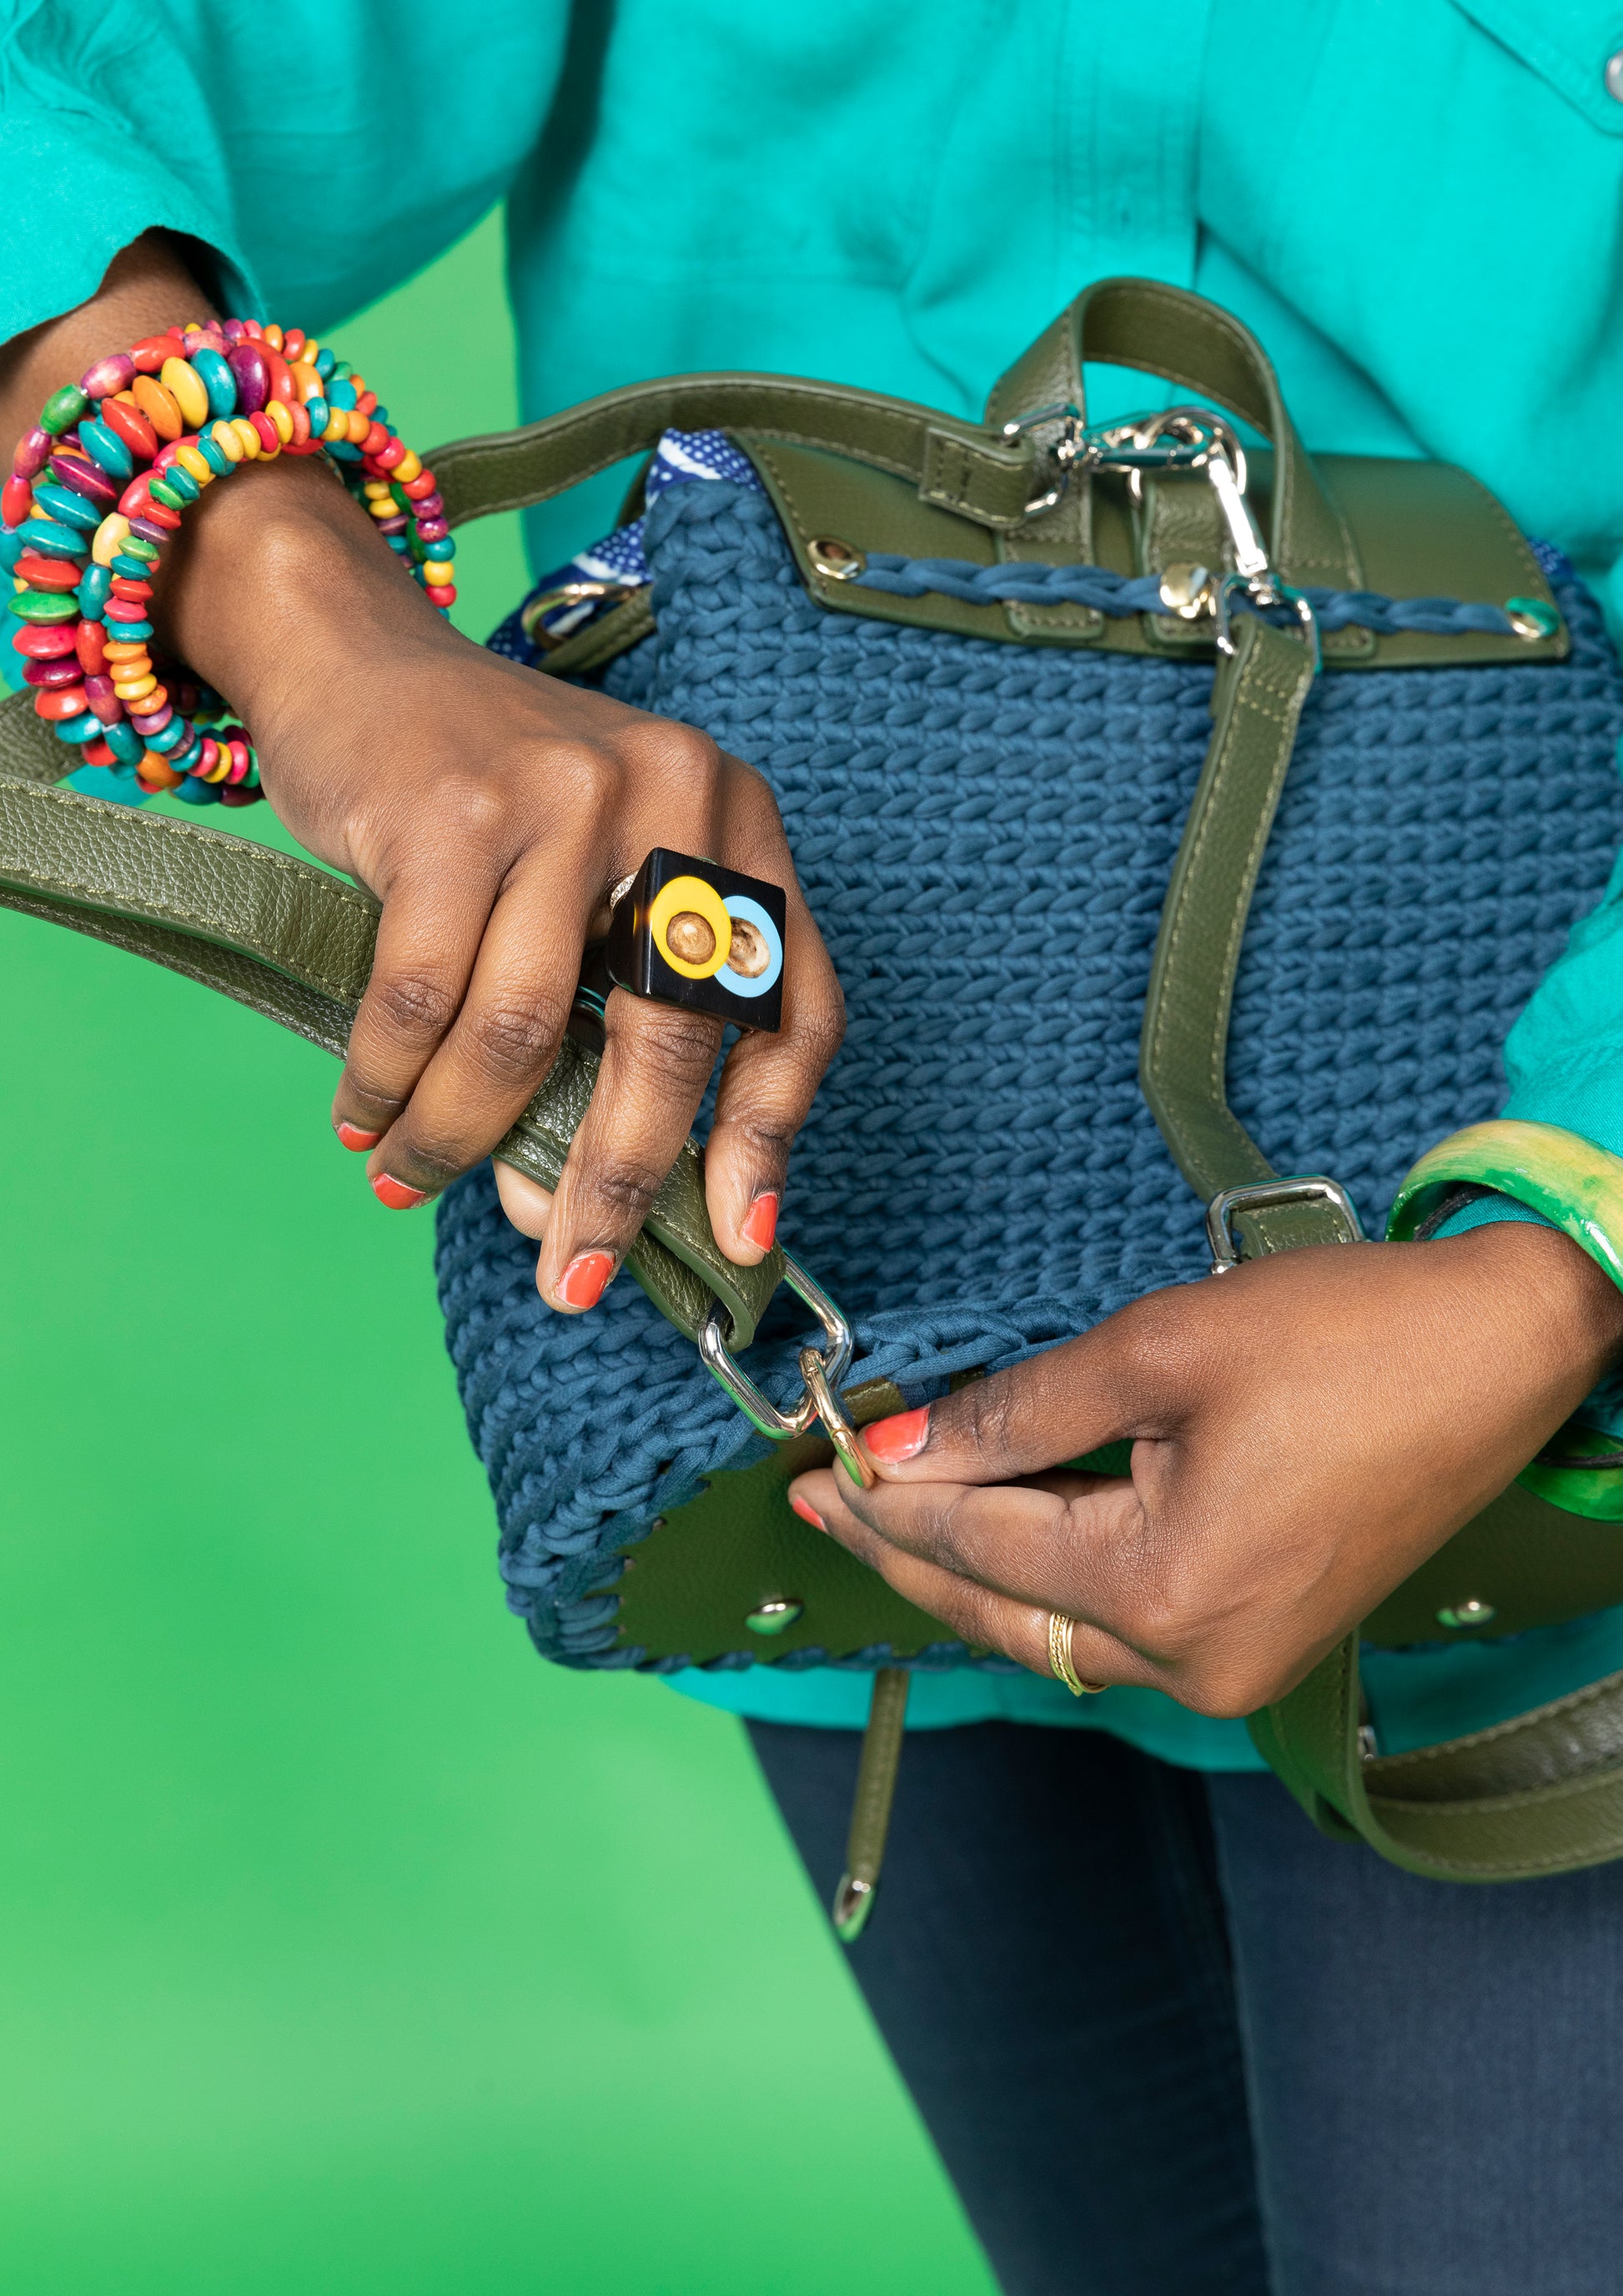 crocheted, dark blue and forest green bag, with an African style print. Model shown adjusting straps.